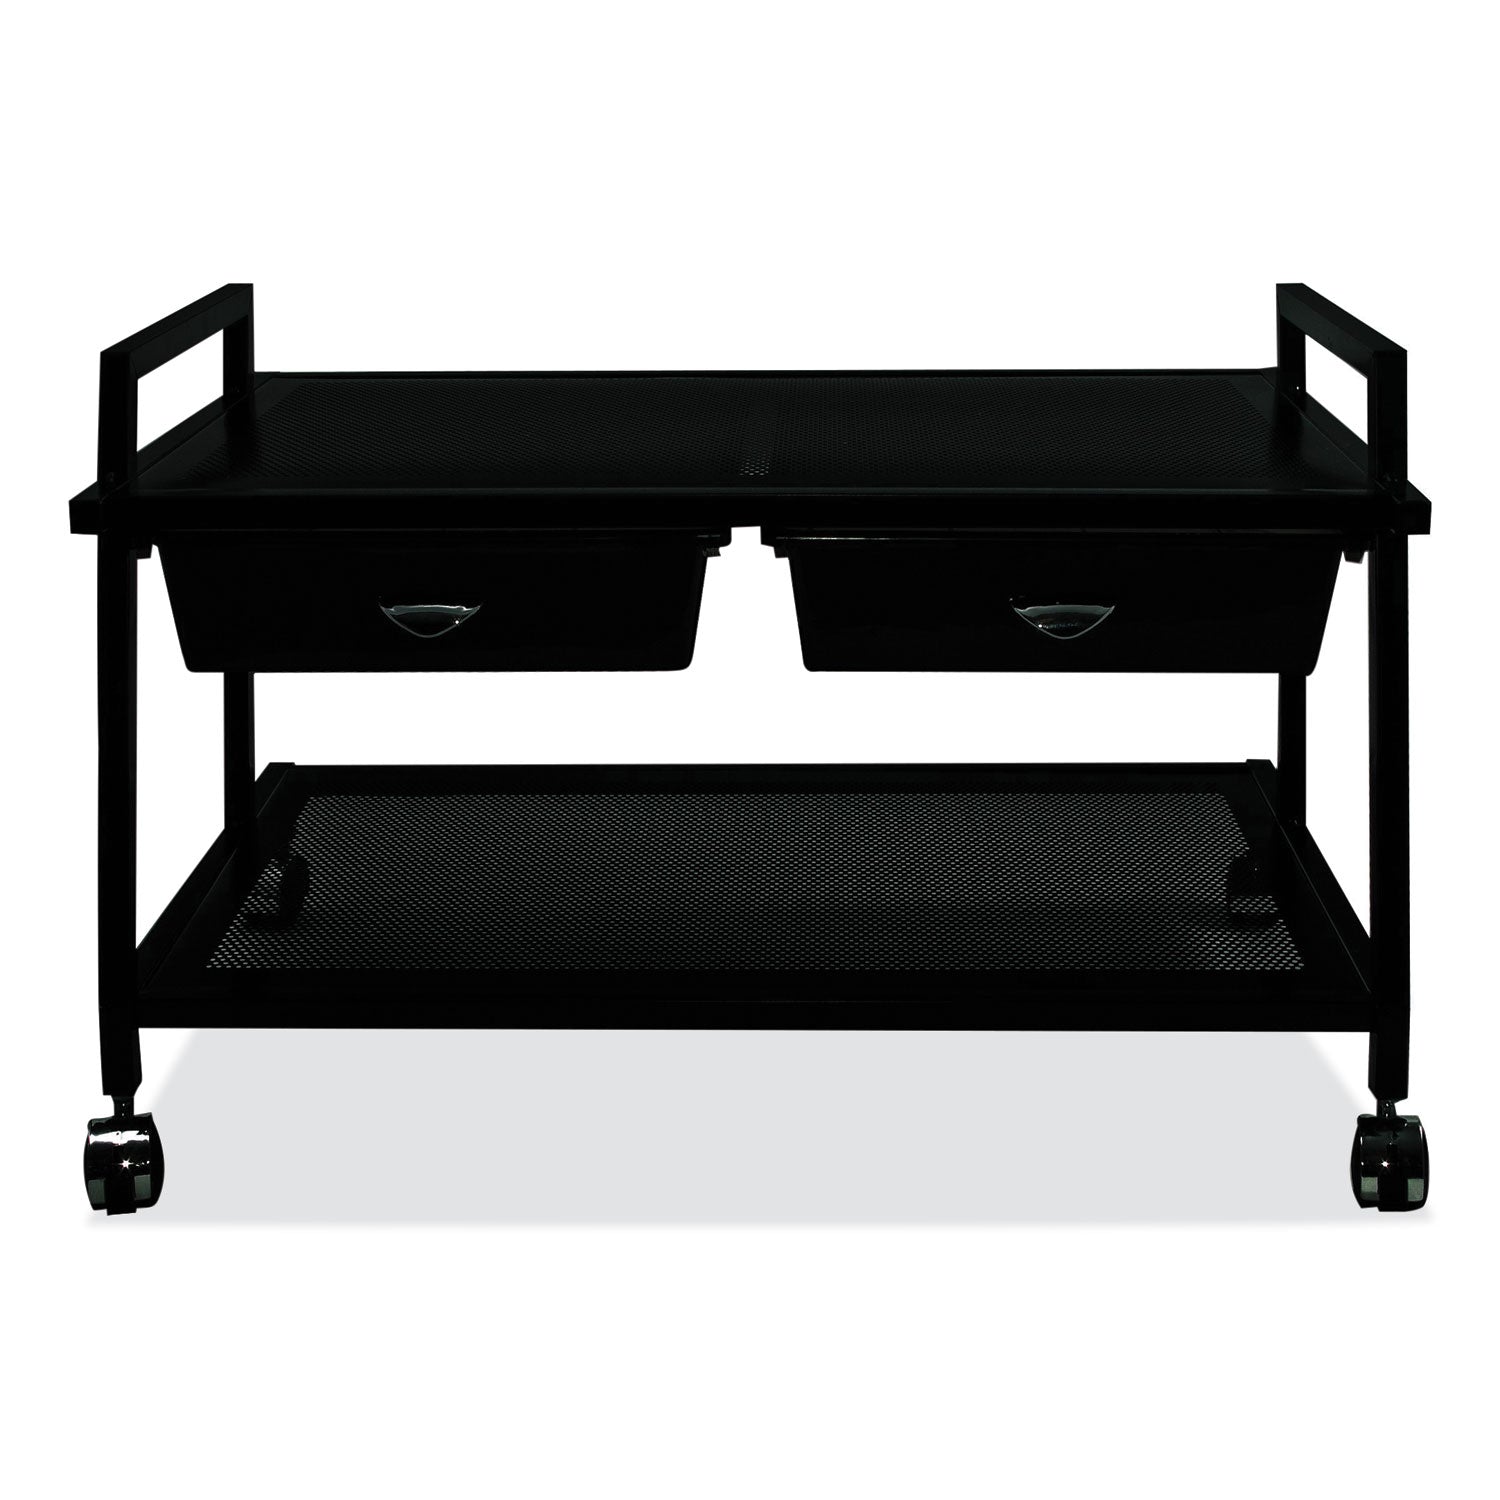 underdesk-machine-stand-with-drawers-253w-x-158d-x-154h-black-ships-in-4-6-business-days_avtvf95530 - 2